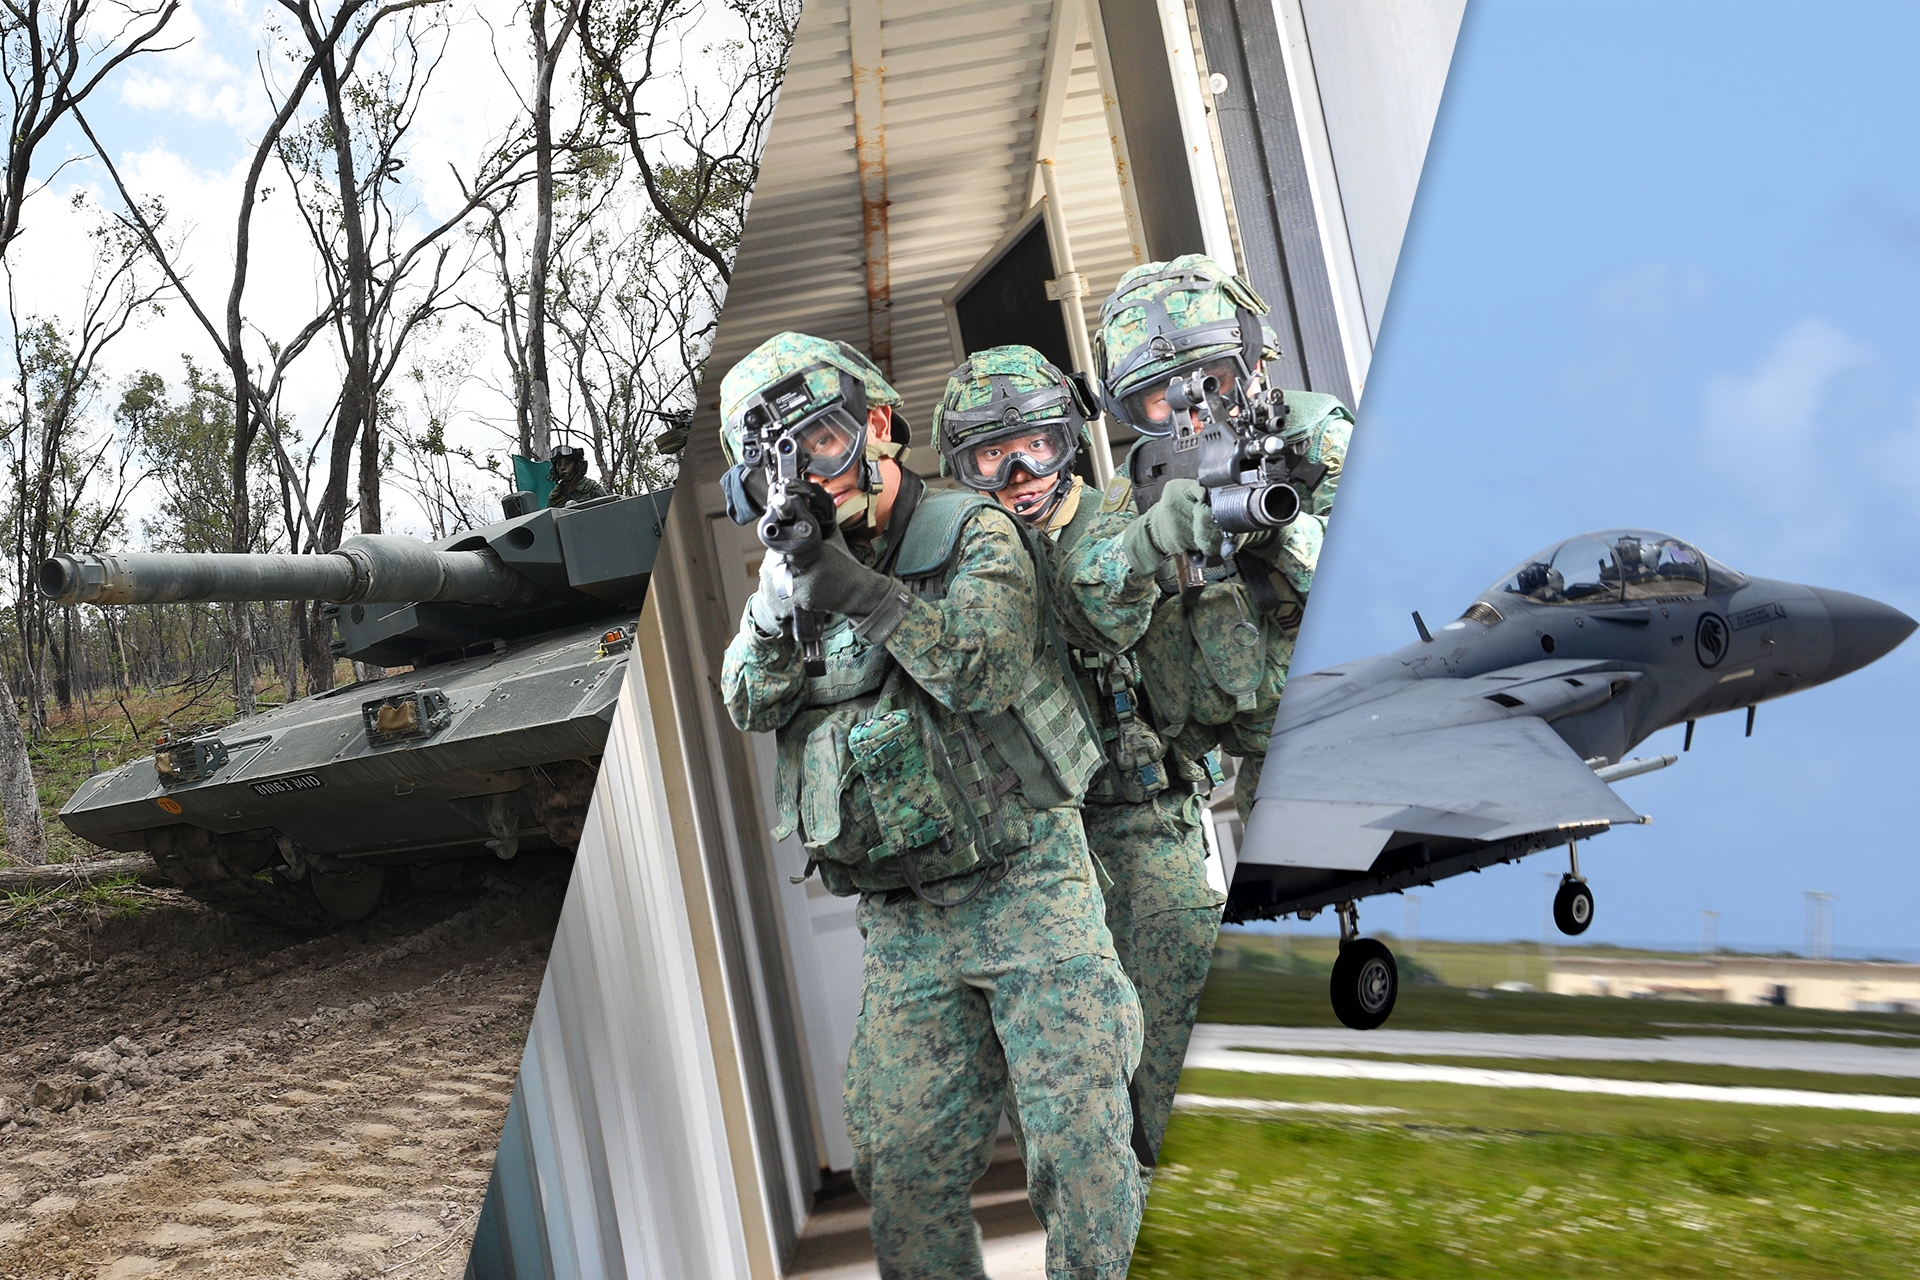 Advanced facilities to be developed to train Next-Gen SAF